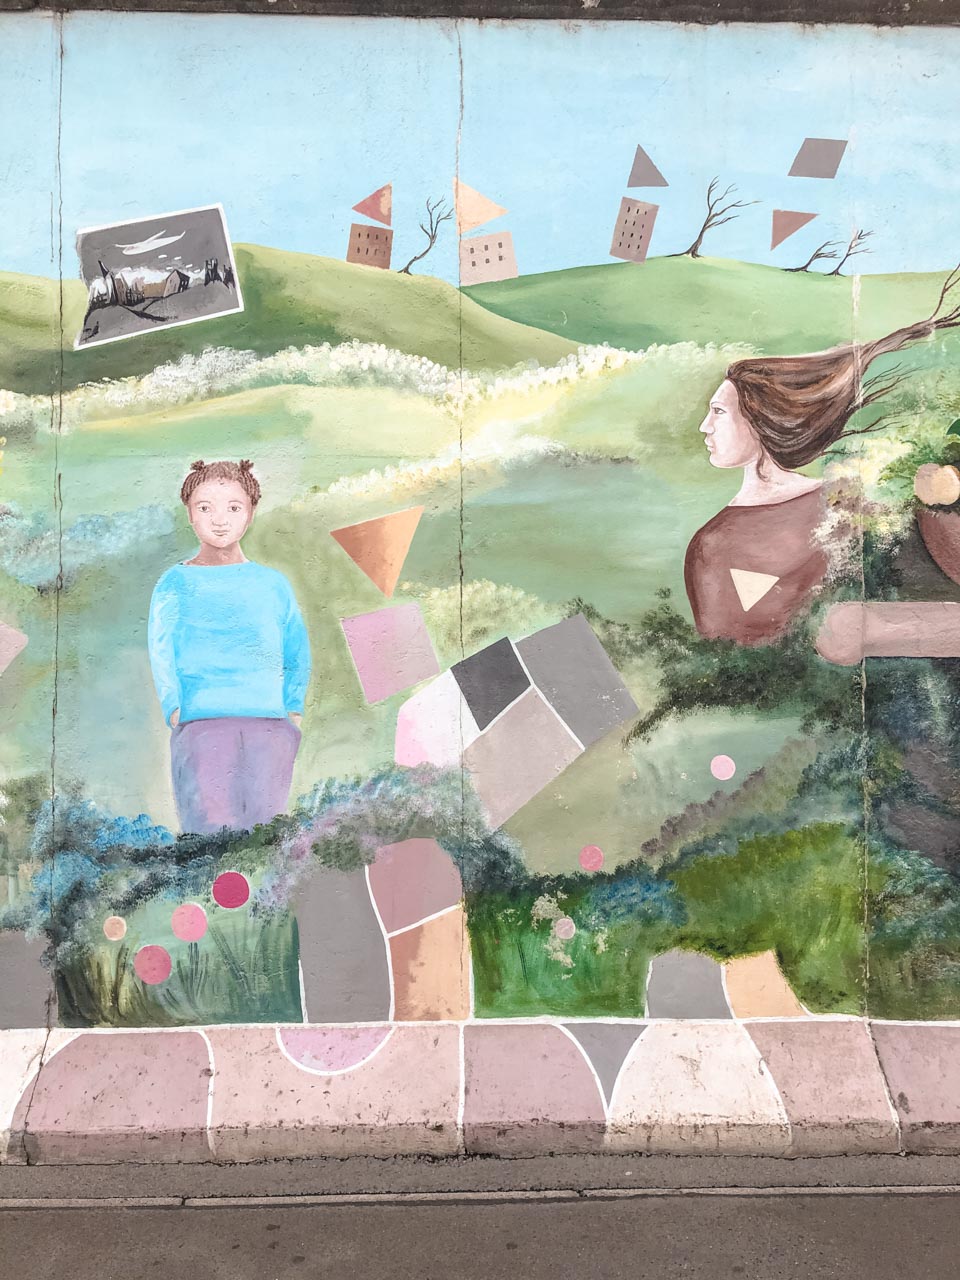 Mural at the East Side Gallery depicting a small girl and an adult woman standing on a meadow